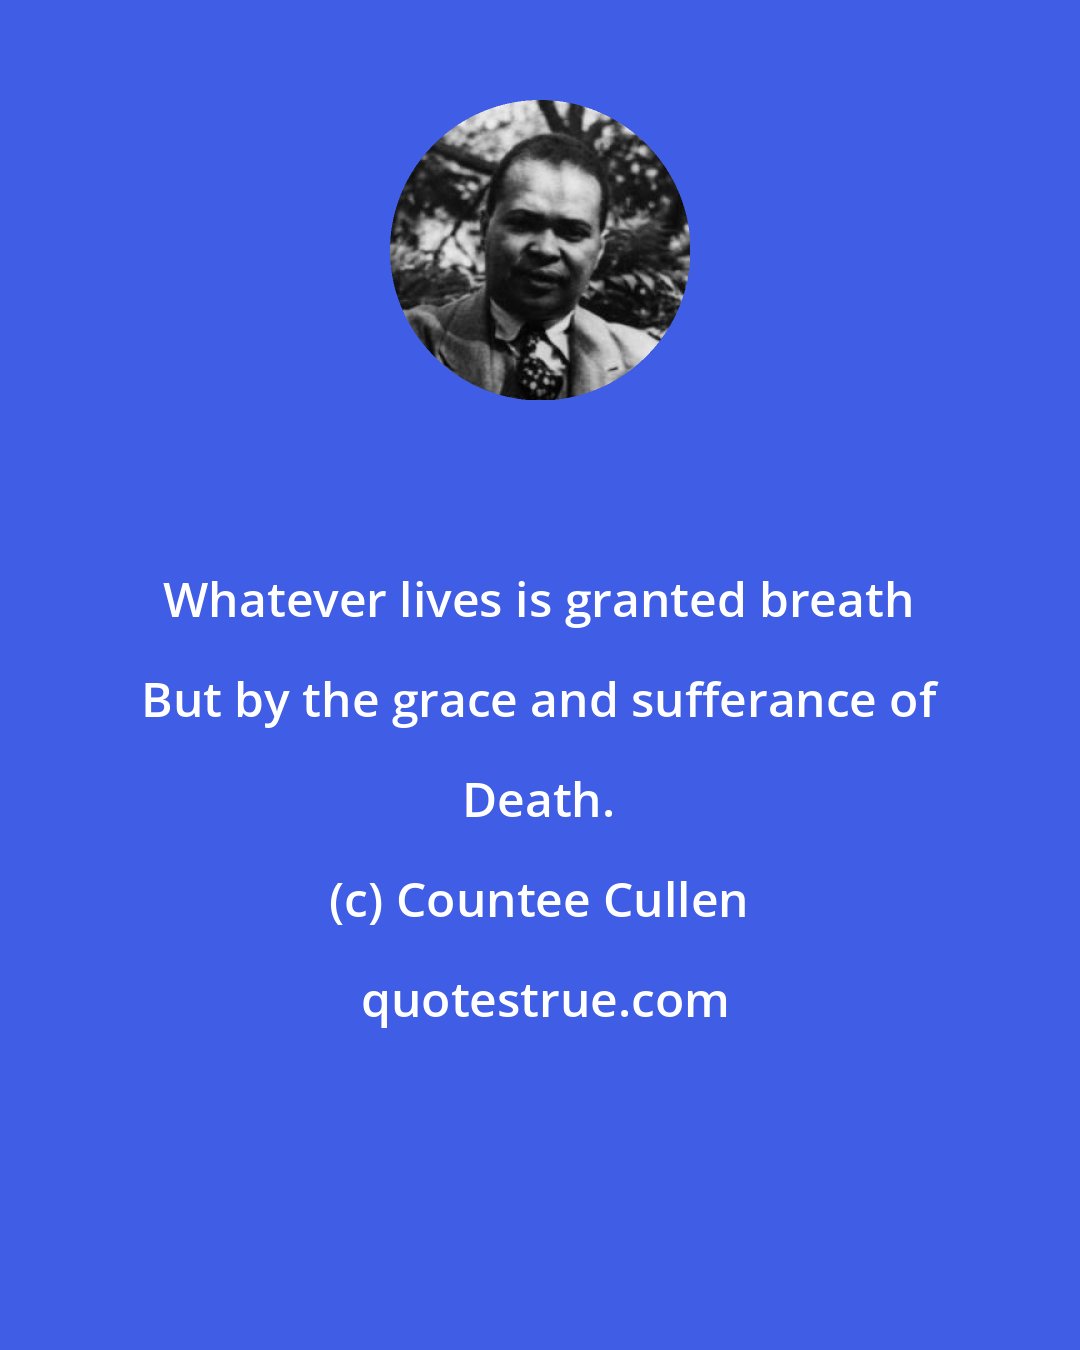 Countee Cullen: Whatever lives is granted breath But by the grace and sufferance of Death.